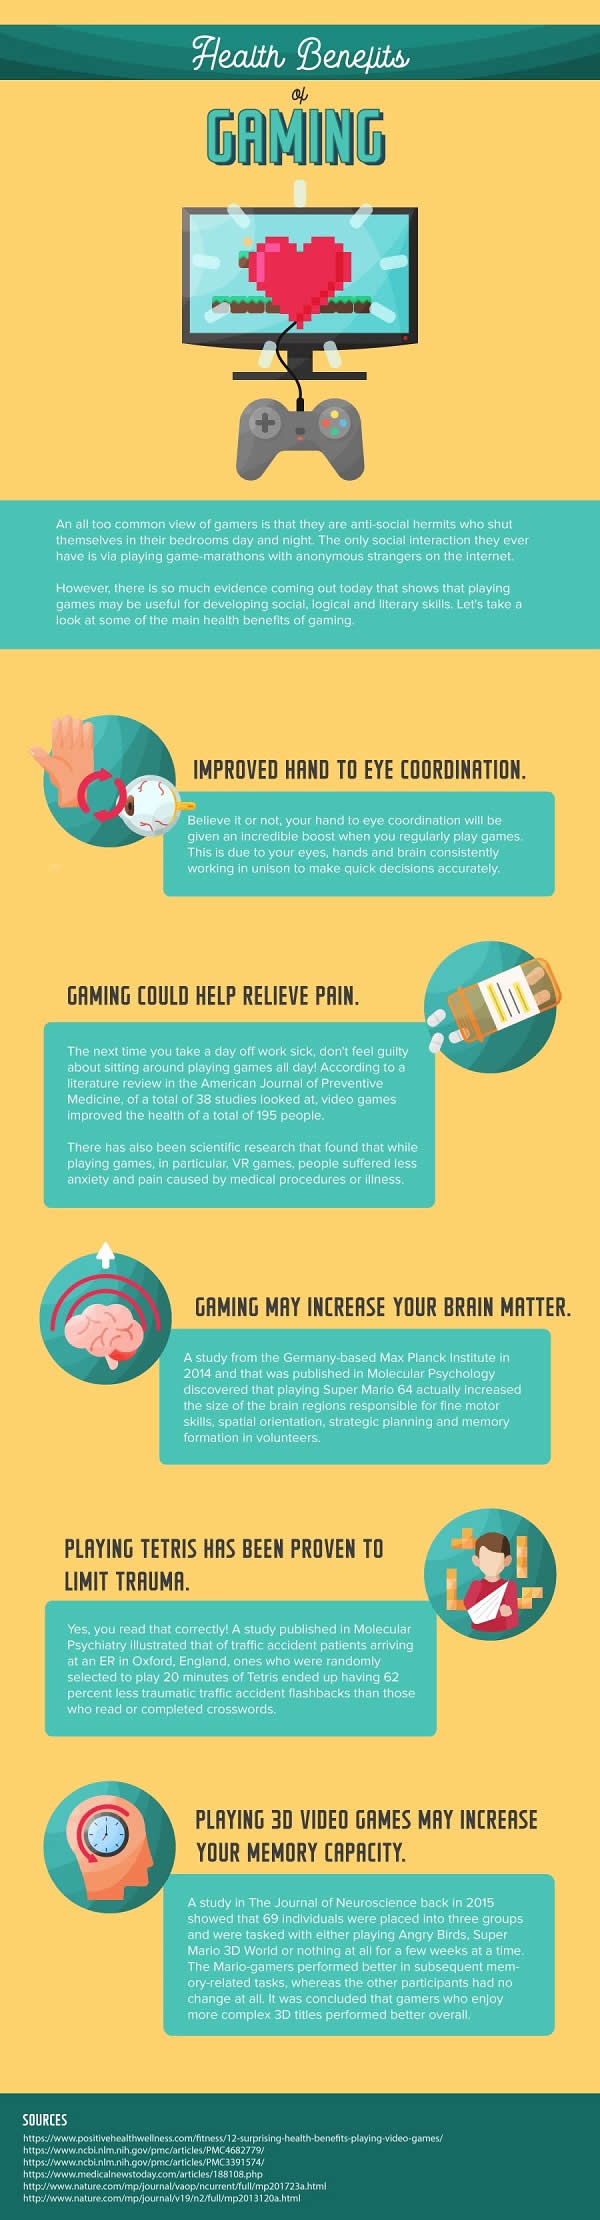 The Benefits of Online Video Games